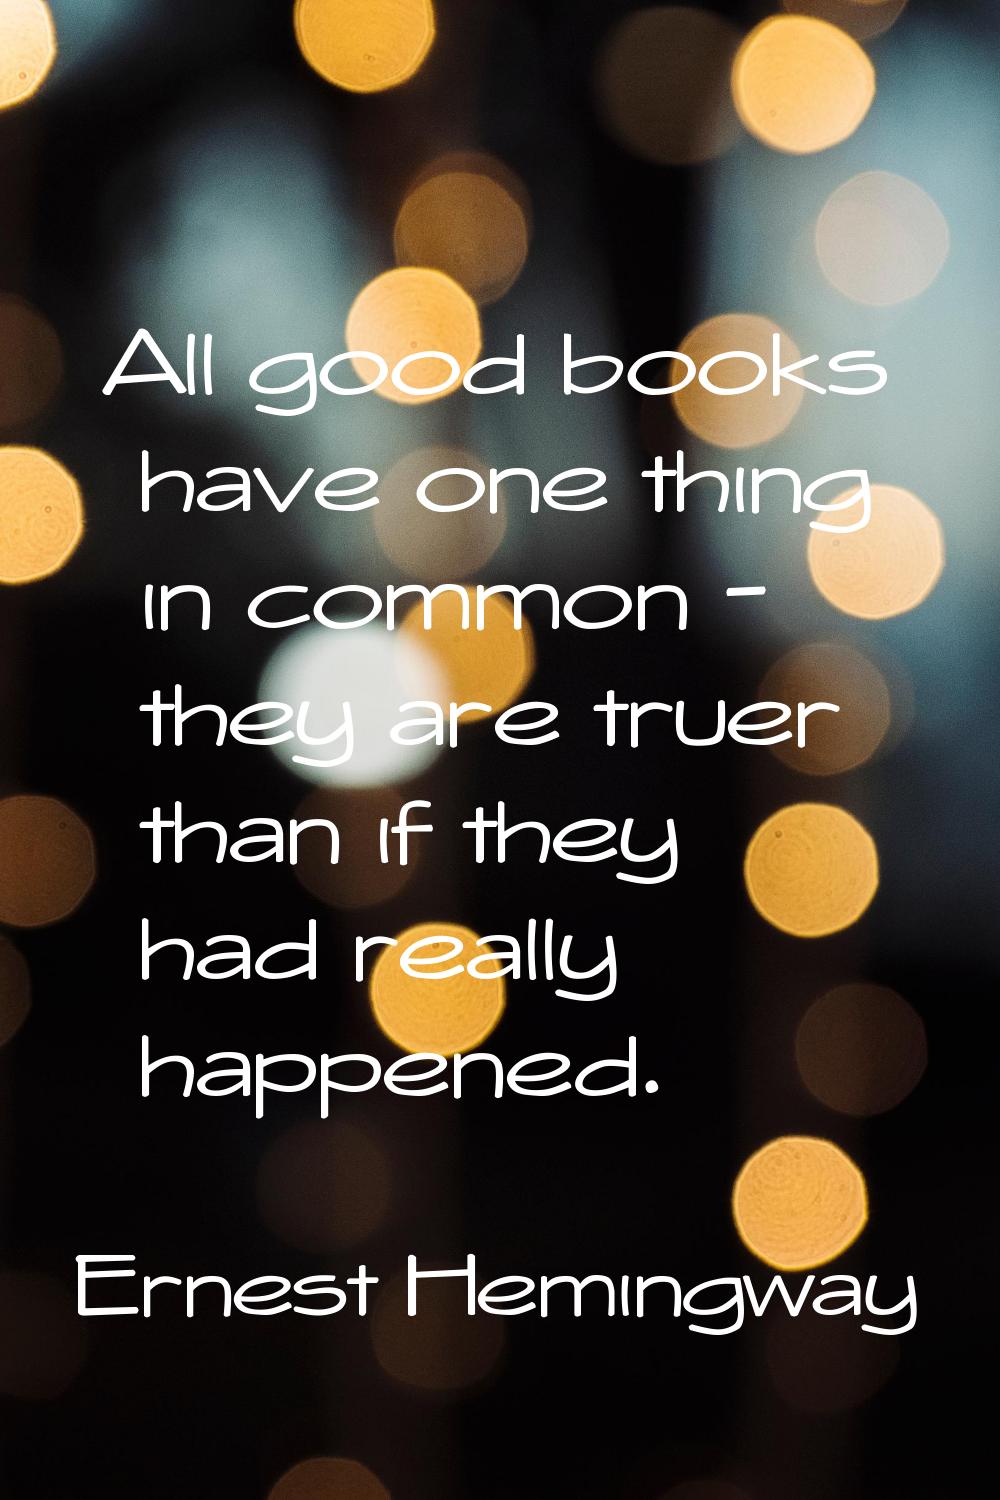 All good books have one thing in common - they are truer than if they had really happened.